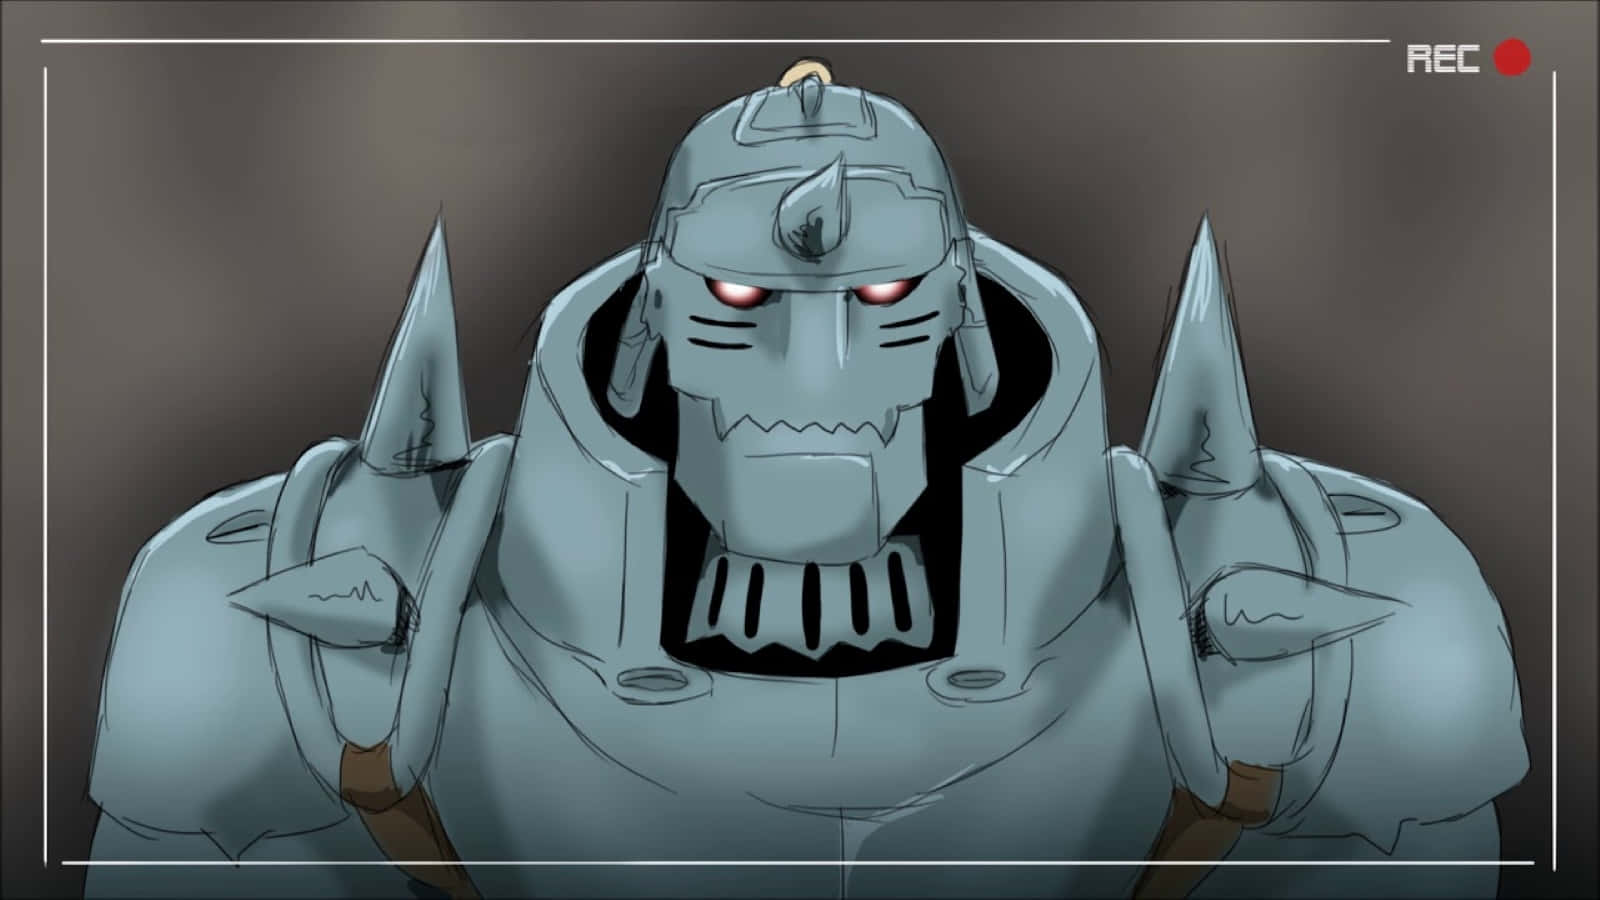 Alphonse Elric standing tall in a dramatic pose with a haunting landscape in the background Wallpaper